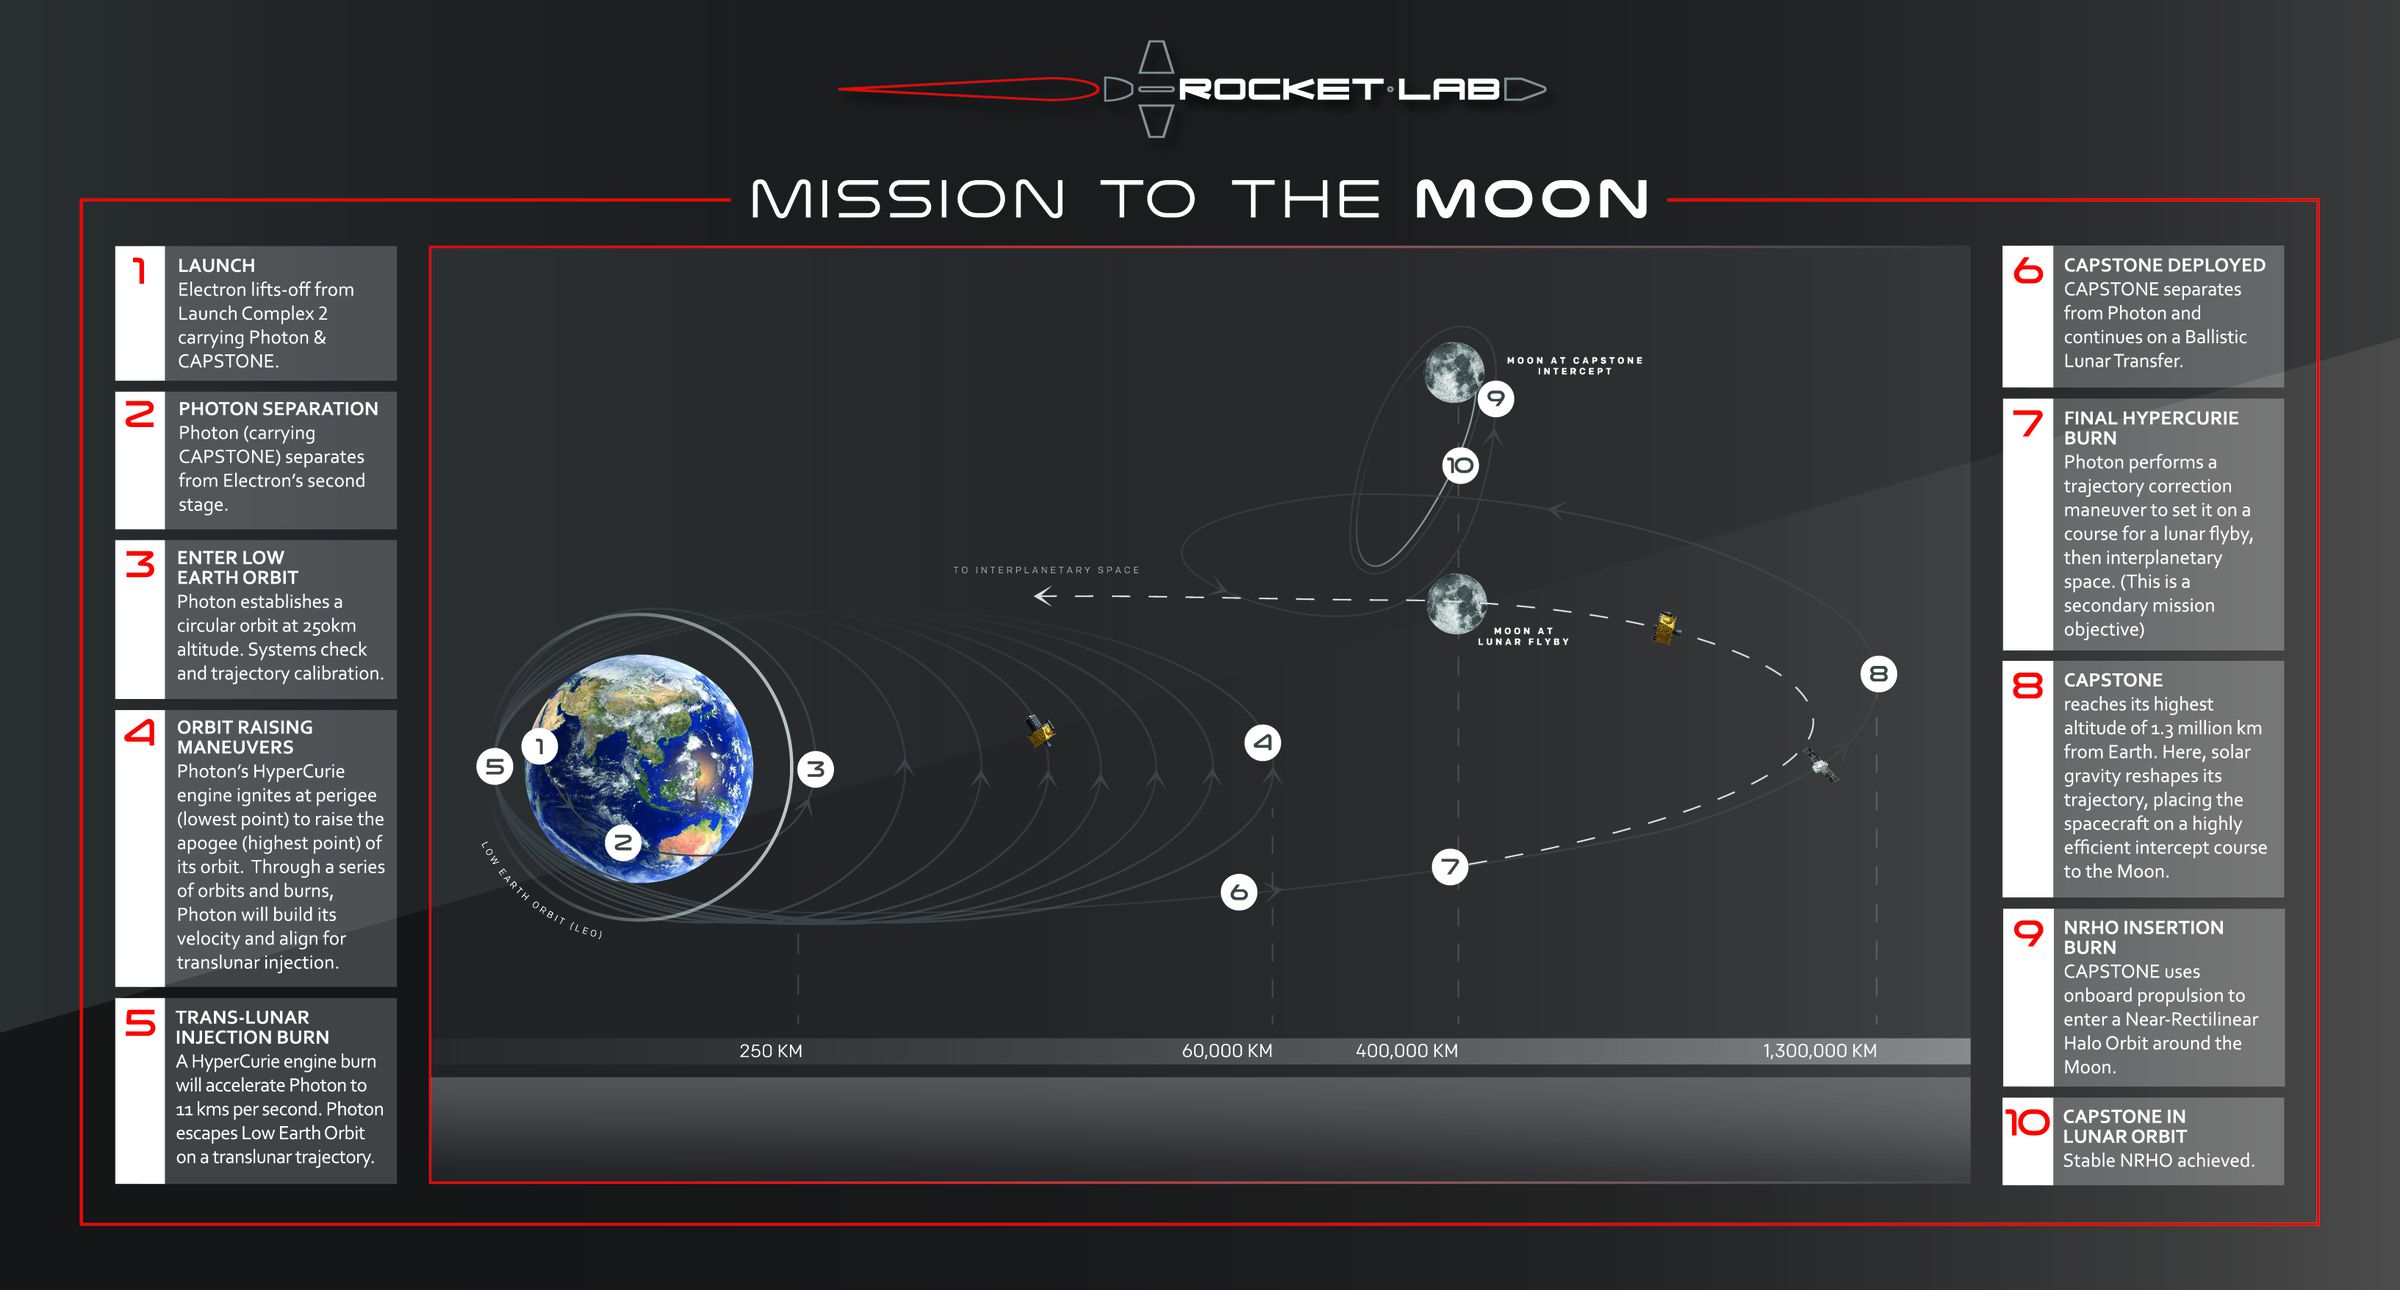 The plan for Rocket Lab’s CAPSTONE mission.